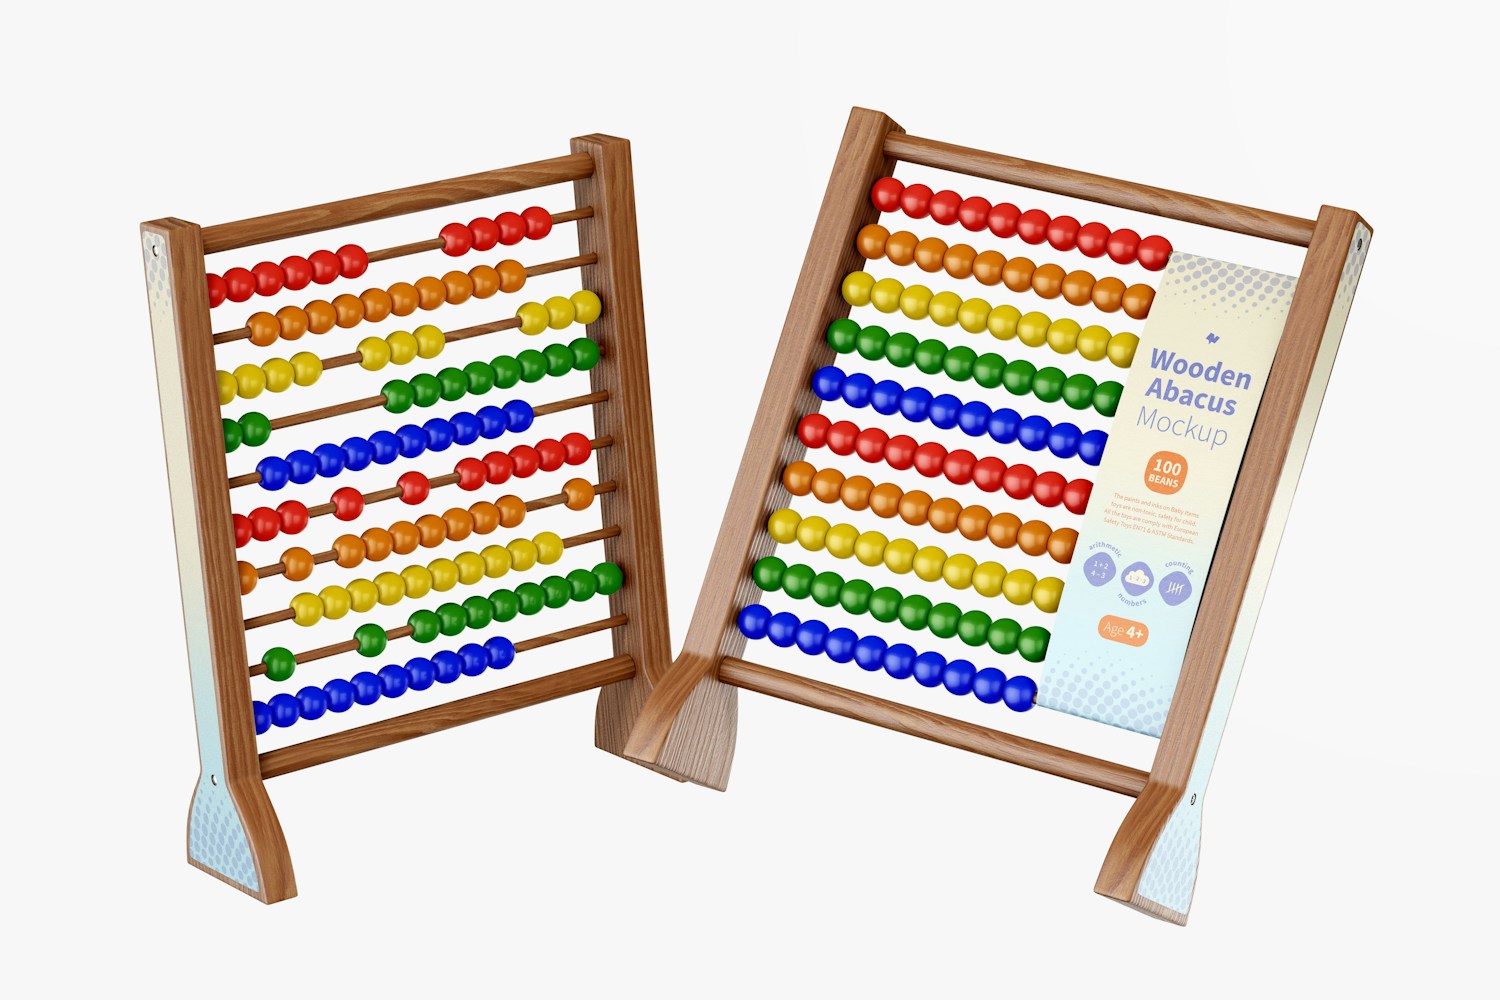 Wooden Abacus Mockup, Floating